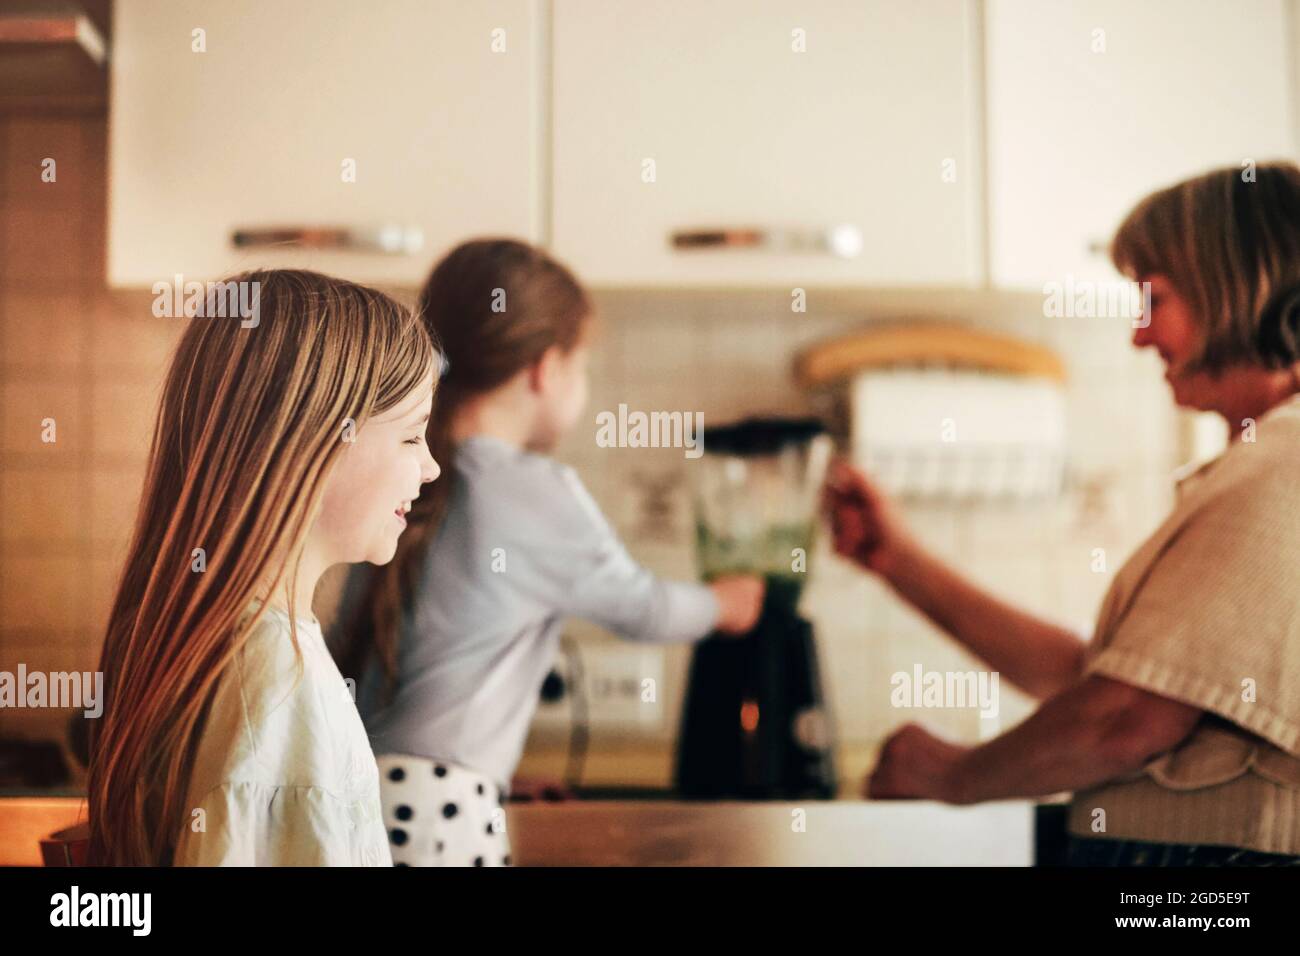 Loving grandmother cooking together with granddaughters at home, using blender to mix vegetables, little girl learning how to use appliances with gran Stock Photo